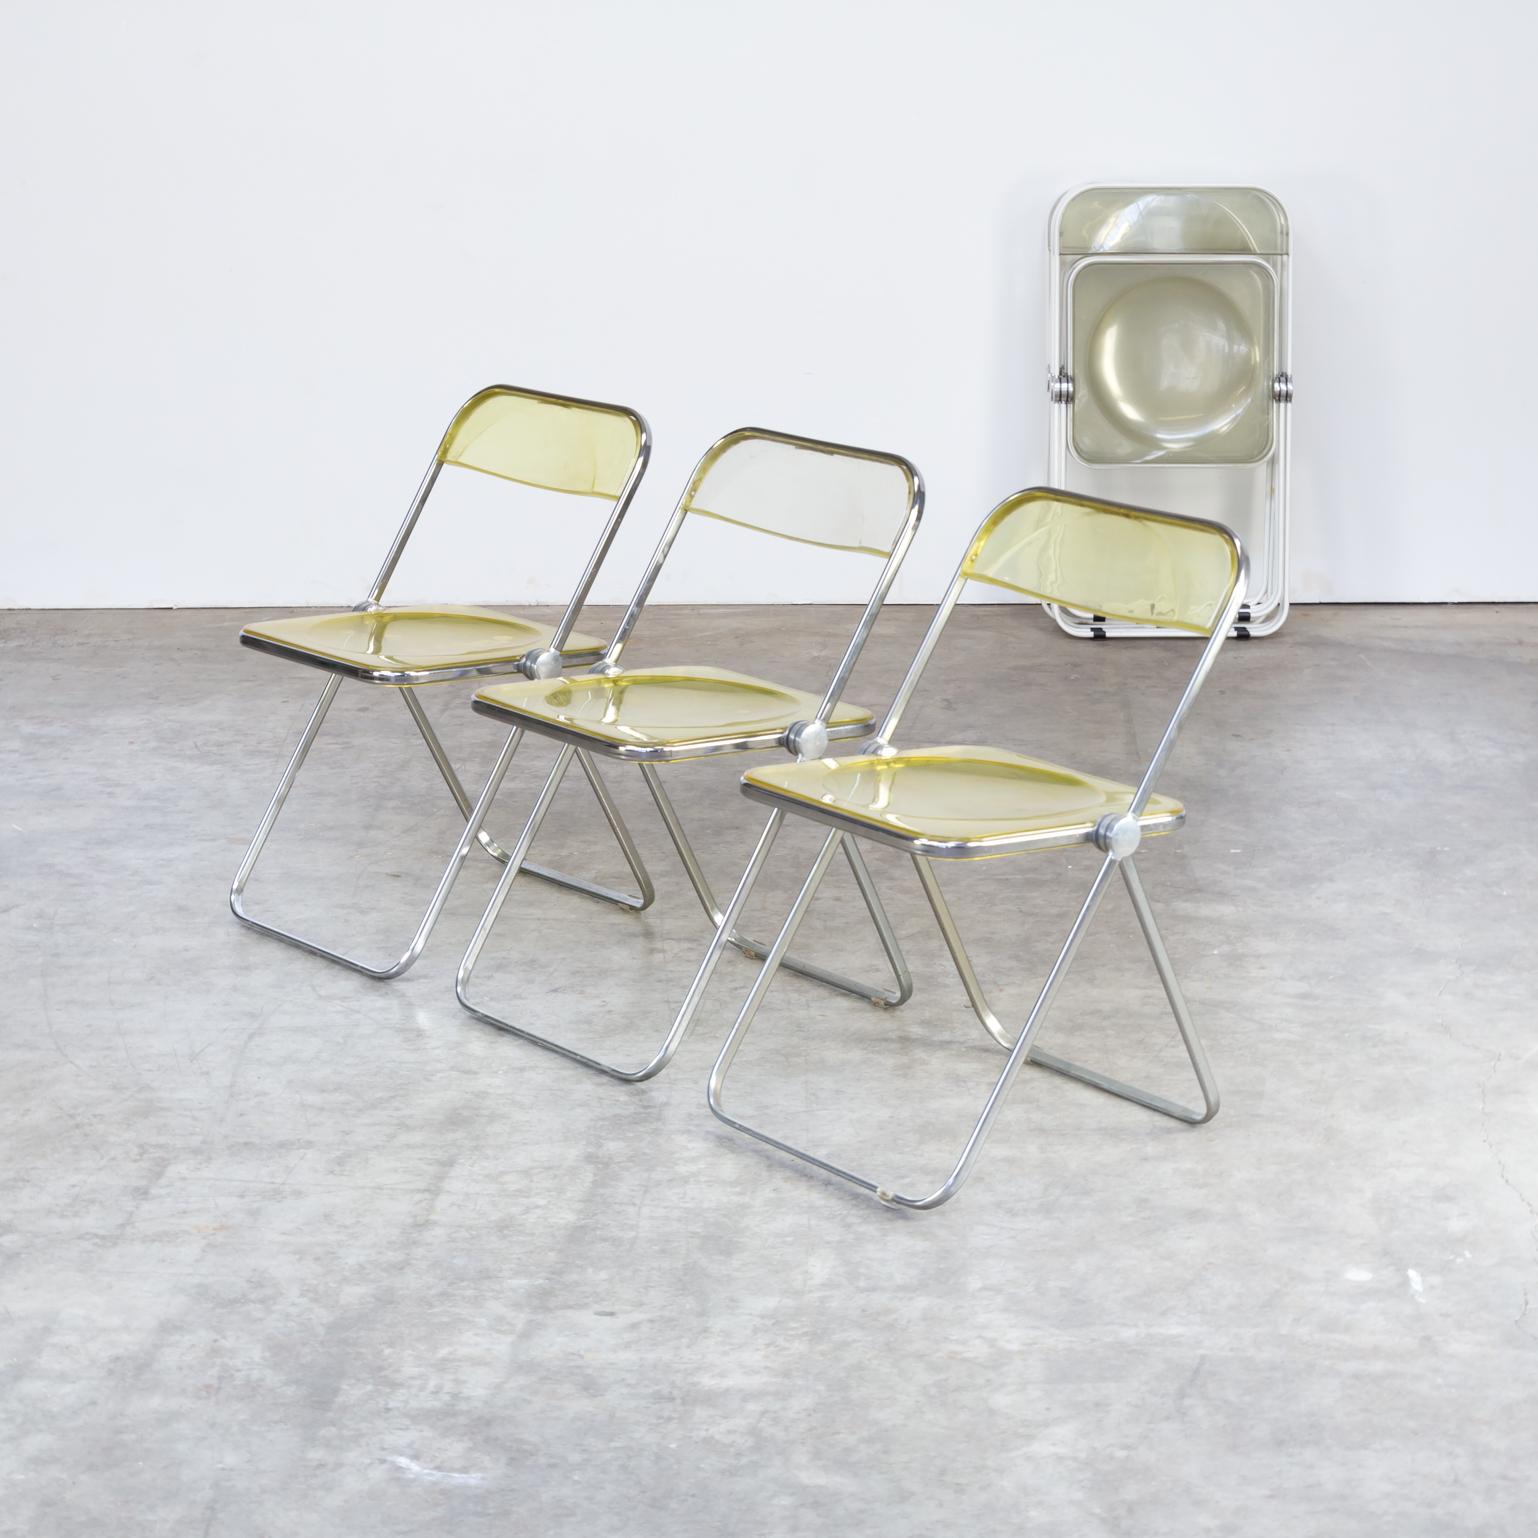 1970s Giancarlo Piretti Folding Chair for Castelli Set of 8 For Sale 1